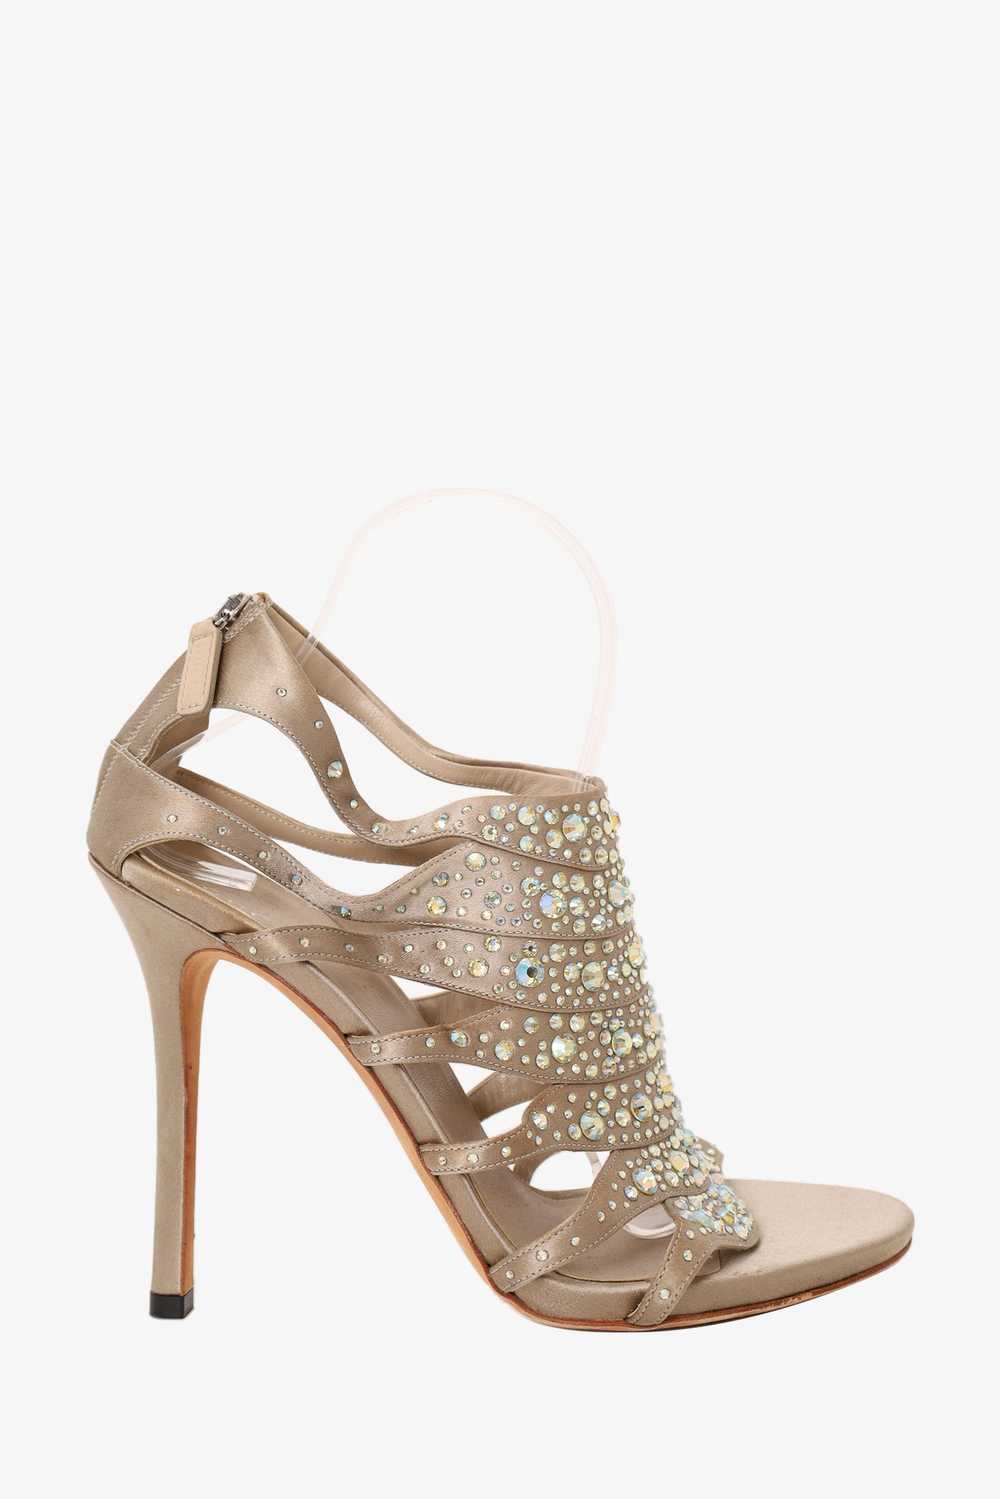 Gucci Gold Satin Crystals Strappy Sandals Size 39… - image 1